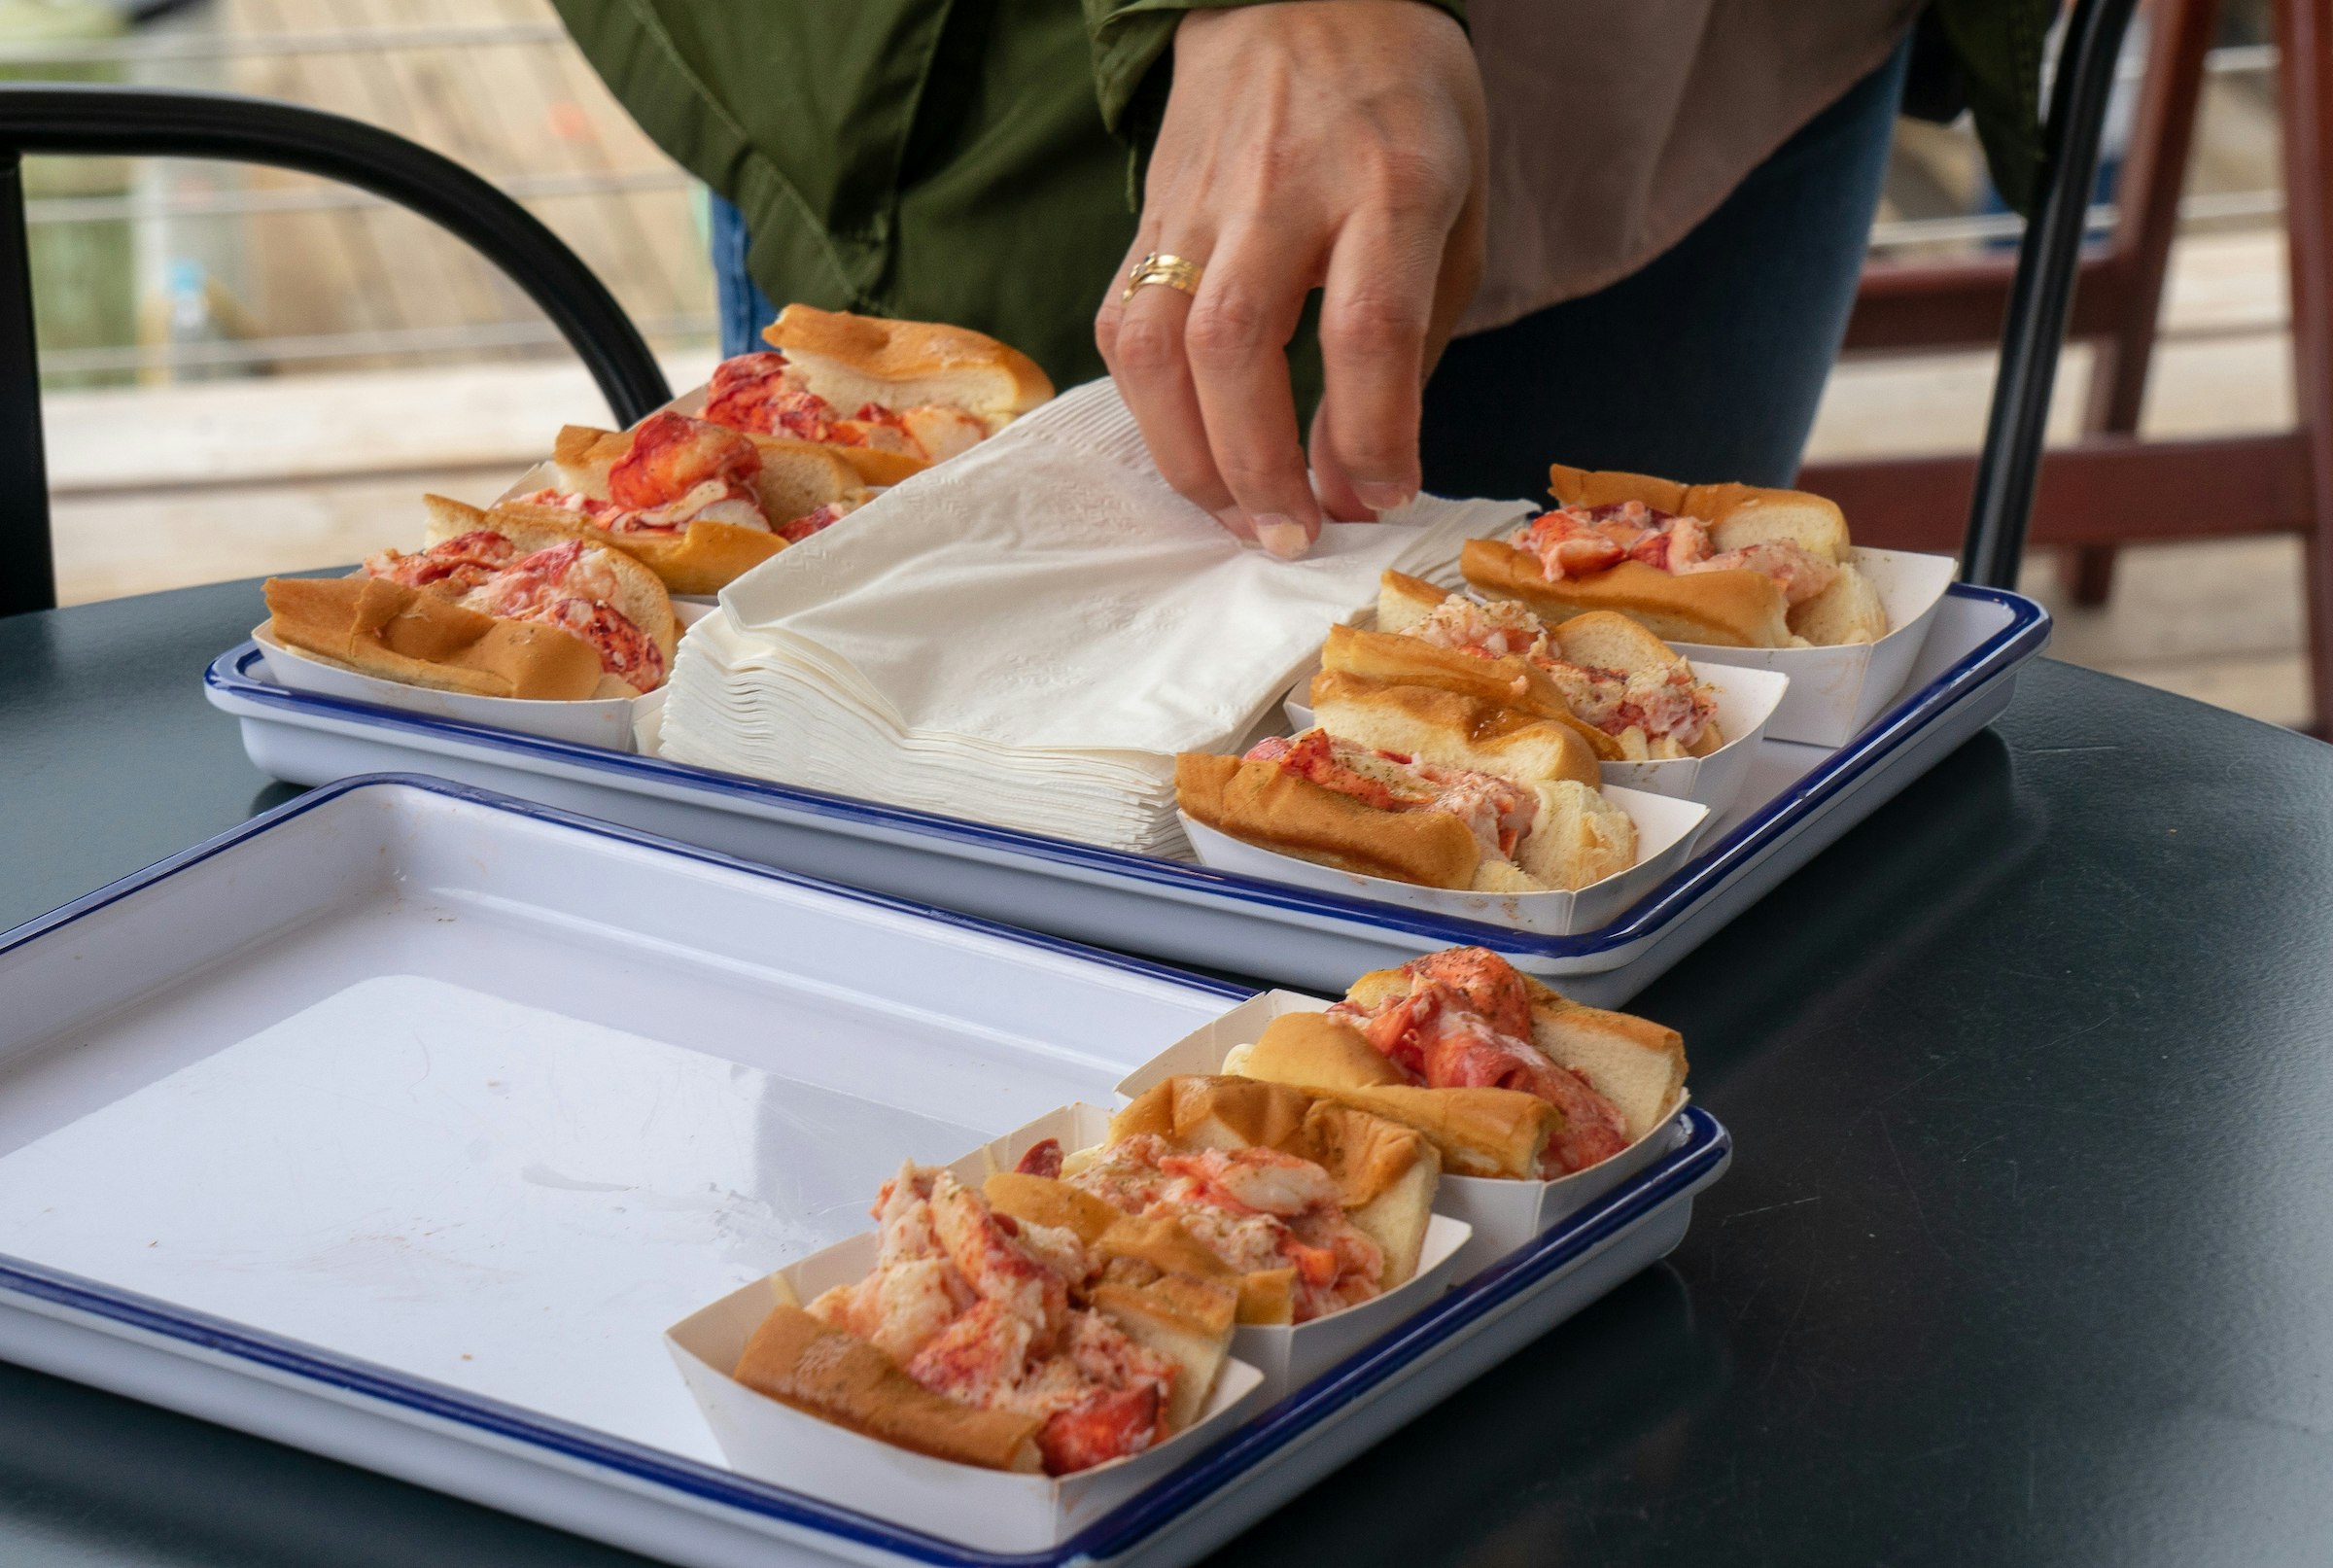 A hand wearing a gold wedding band reaches for a napkin from a pile set between two rows of Maine Lobster Rolls at Luke's in Portland. The rolls are in small paper trays and are heaped with bright red and pink lobster meat in white and blue enamel trays